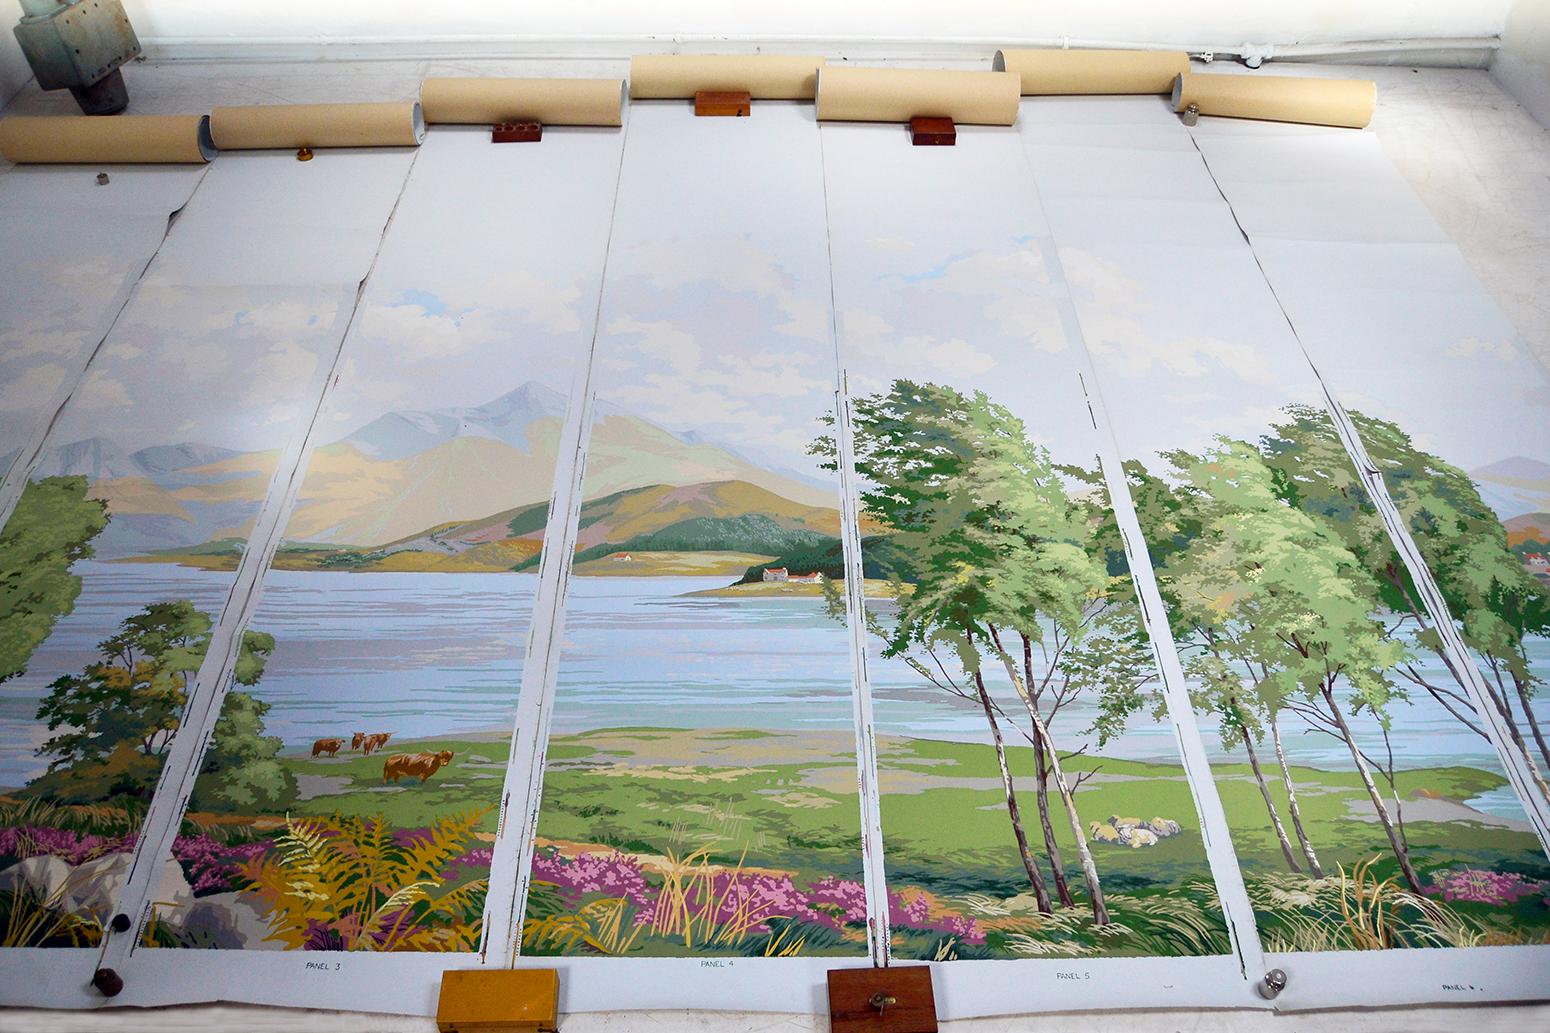 Stunning ‘Scottish Highlands’ block printed wallpaper by Arthur Sanderson & Sons. The scenic designs depict a Scottish landscape of misty mountains surrounding Loch Lomond, with cattle and typical lochside cottages over 7 panels all on a pale blue